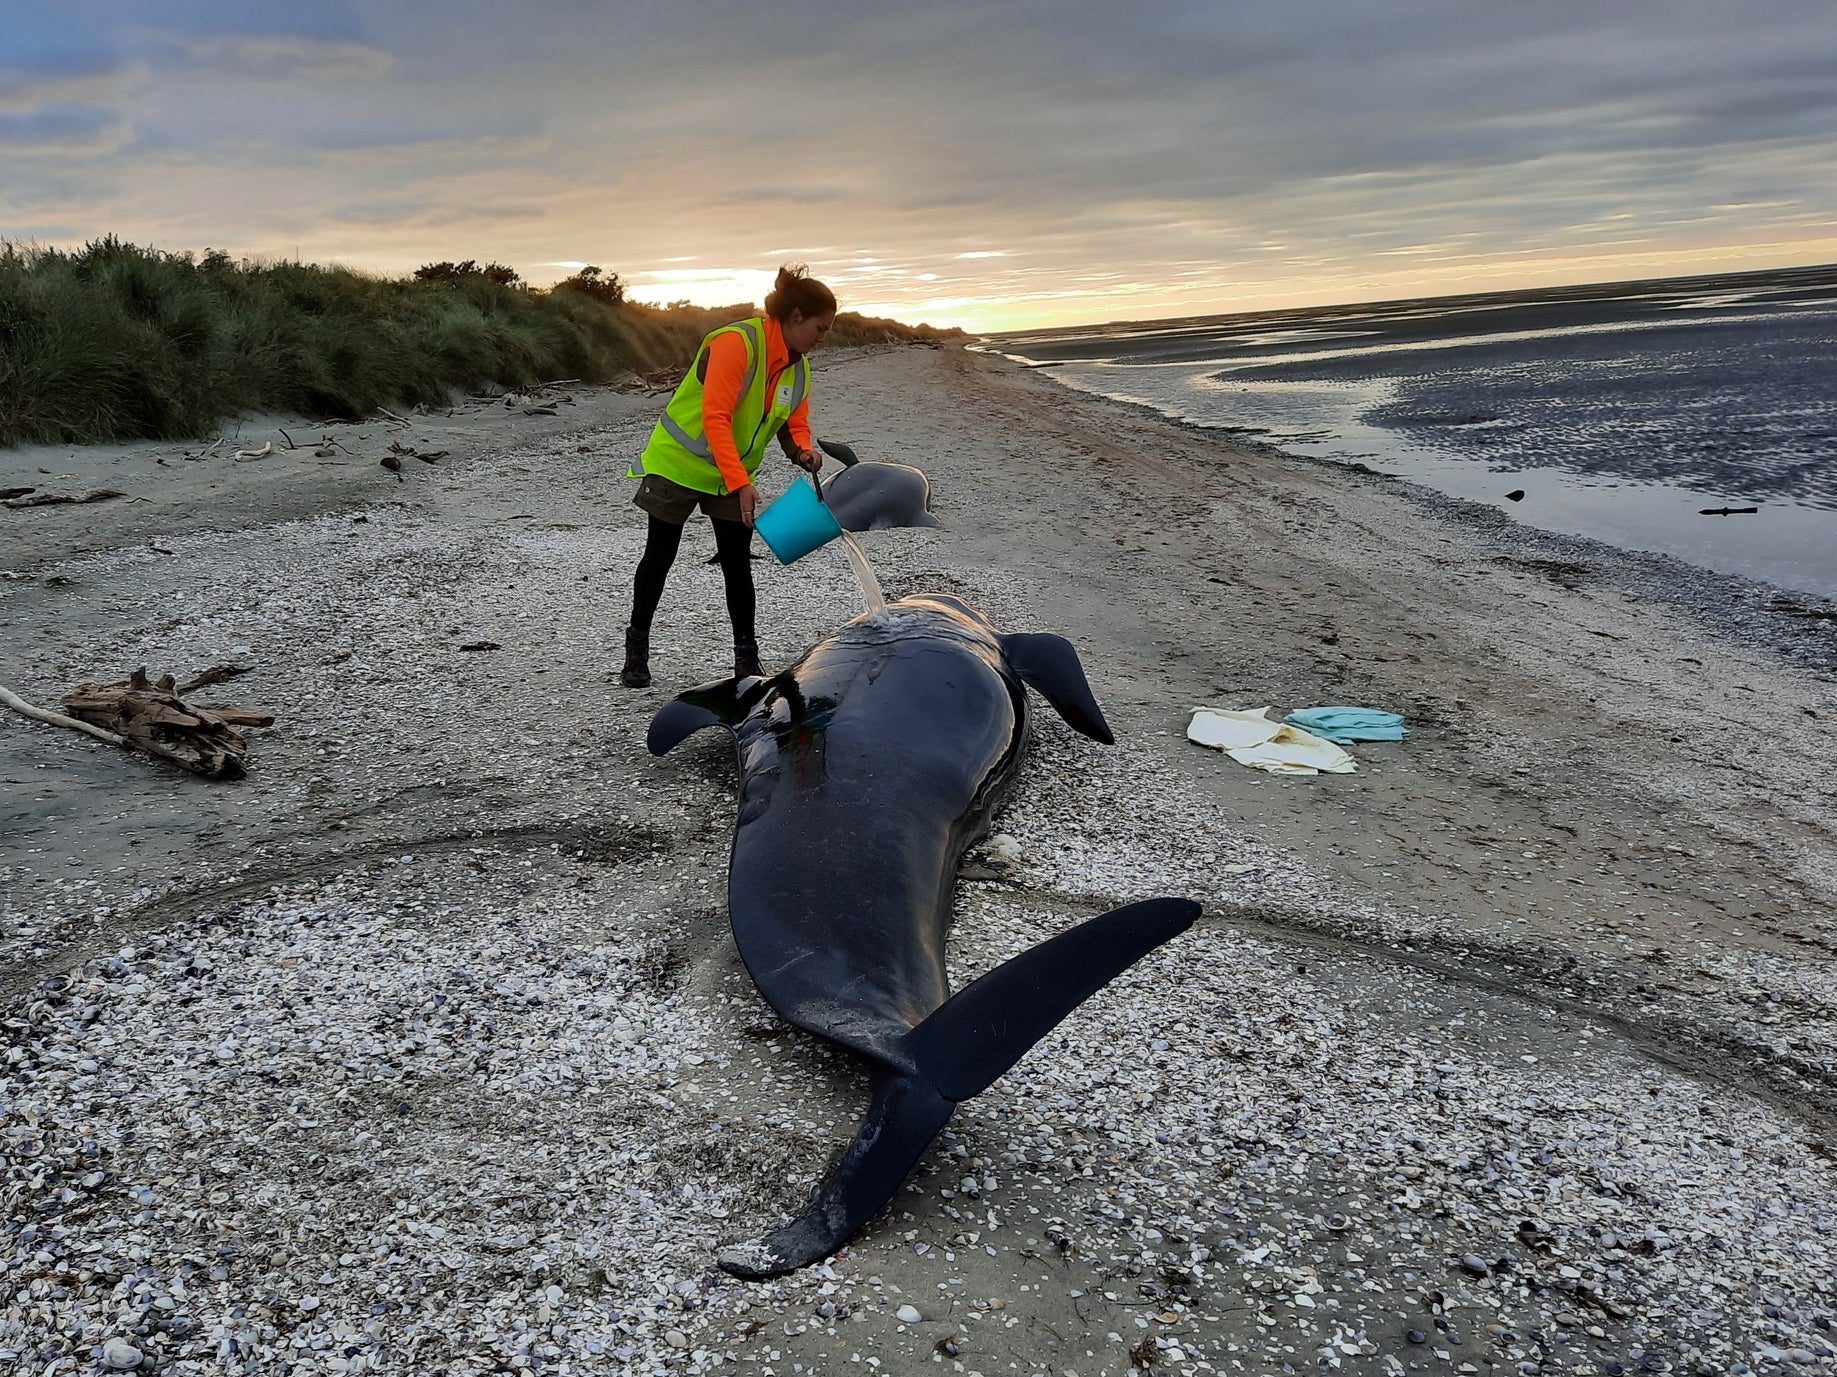 Officials said a group of 34 whales were found washed up together on shore